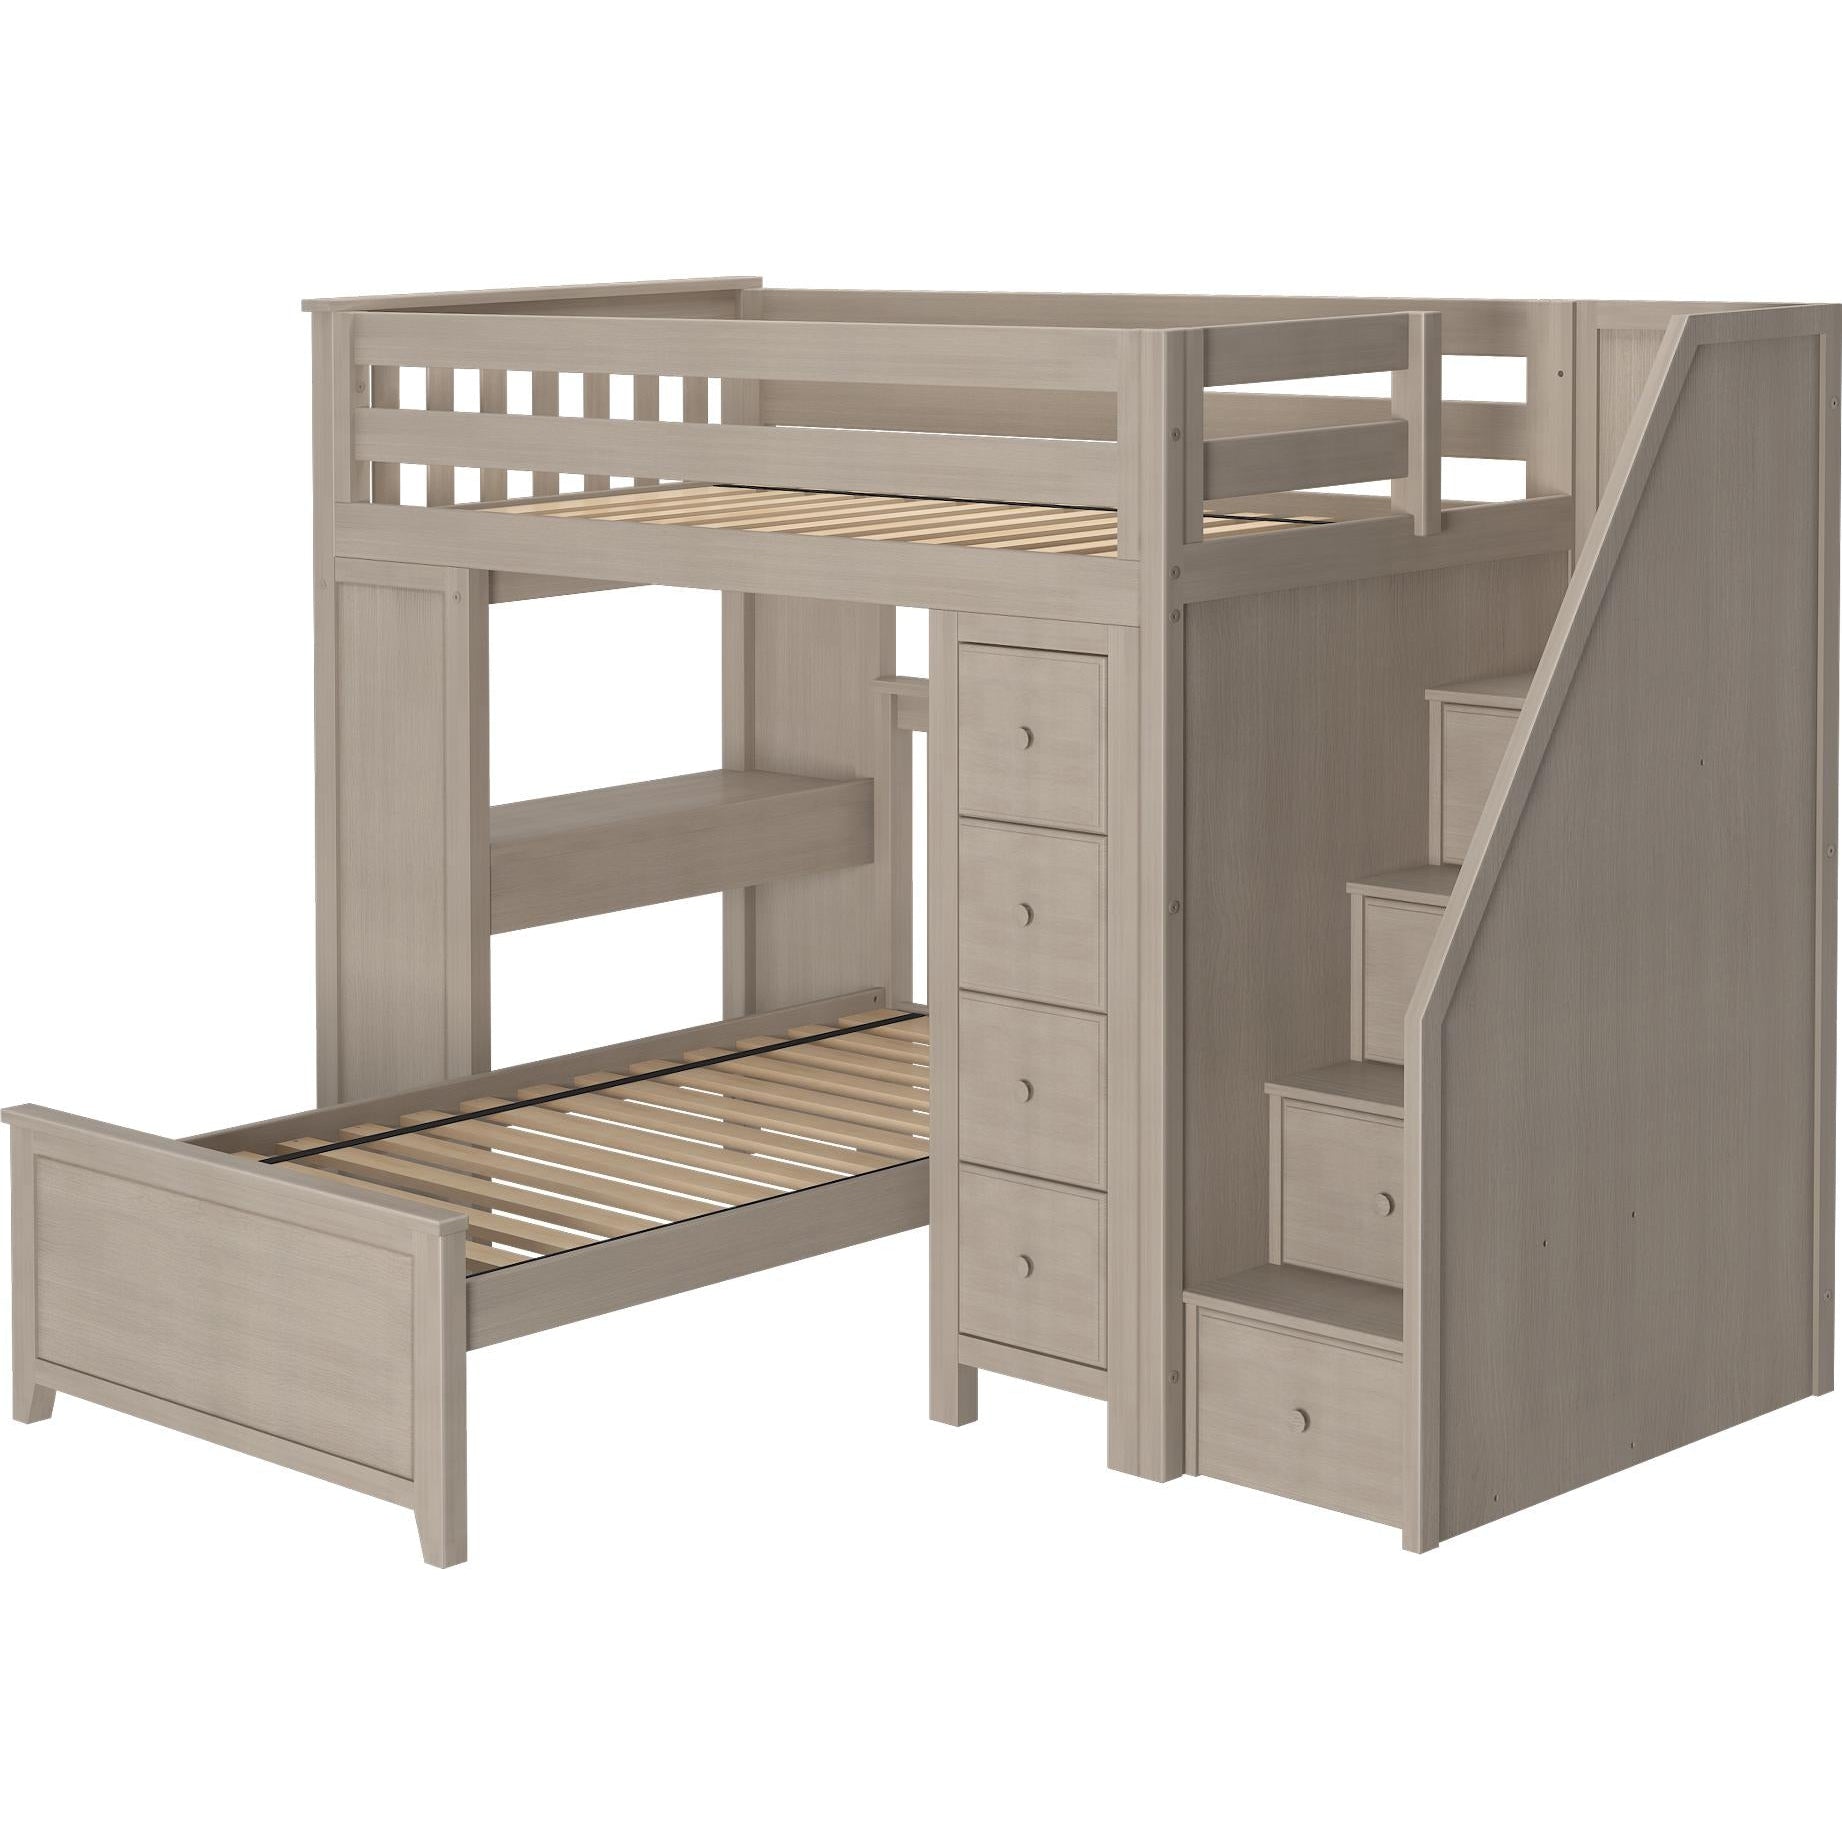 Solutions Chester Staircase Loft Bed Desk + Dresser + Twin Bed